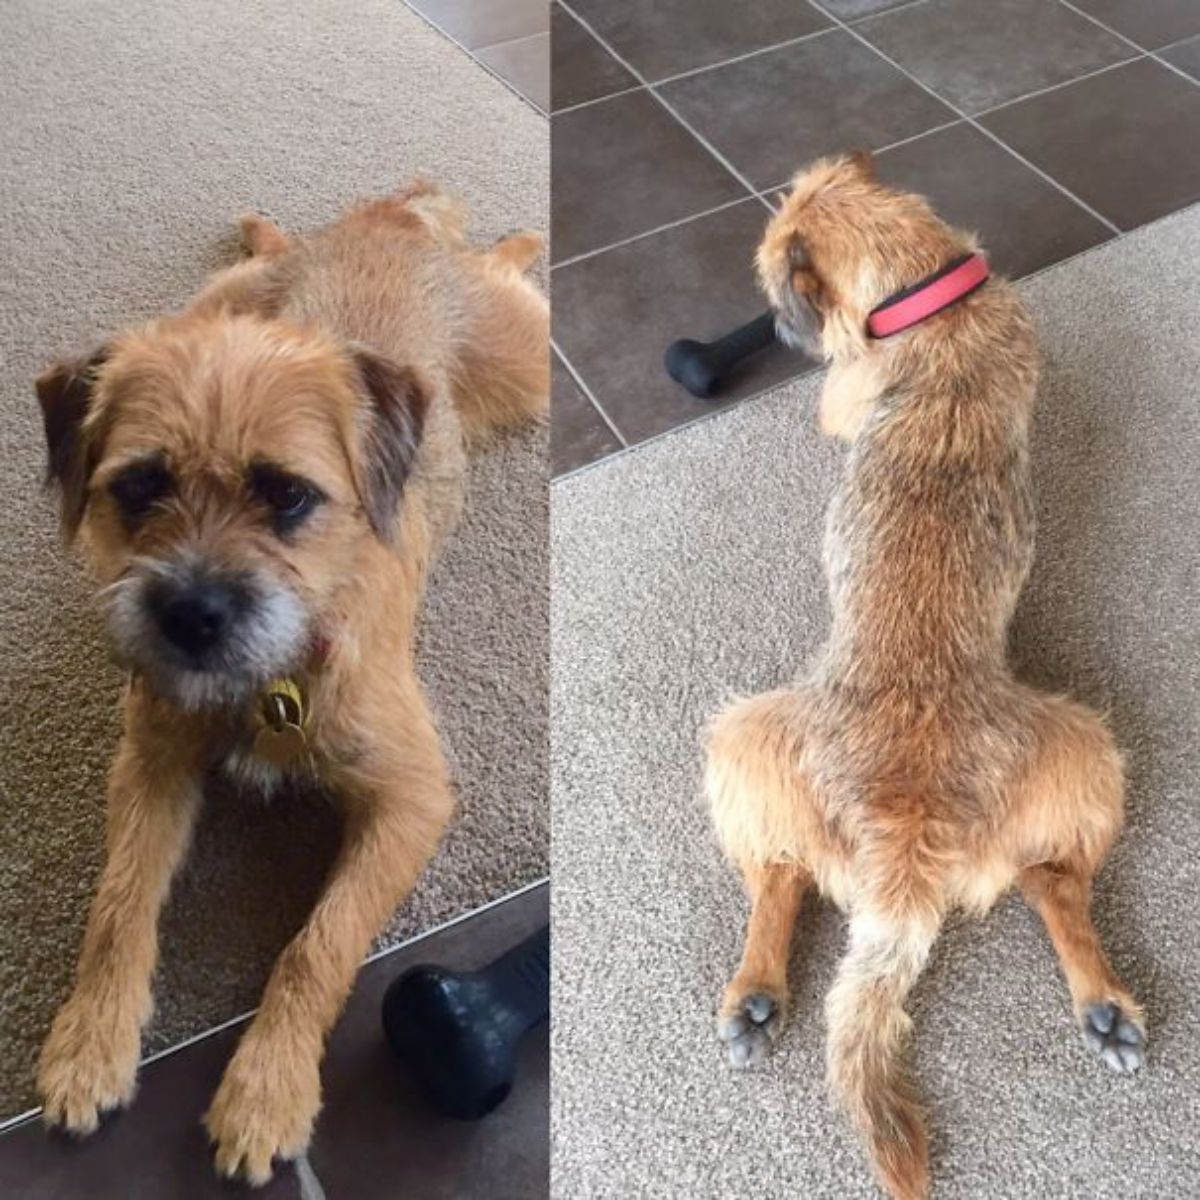 2 photos of a wiry haired brown and white dog doing a frog yoga pose